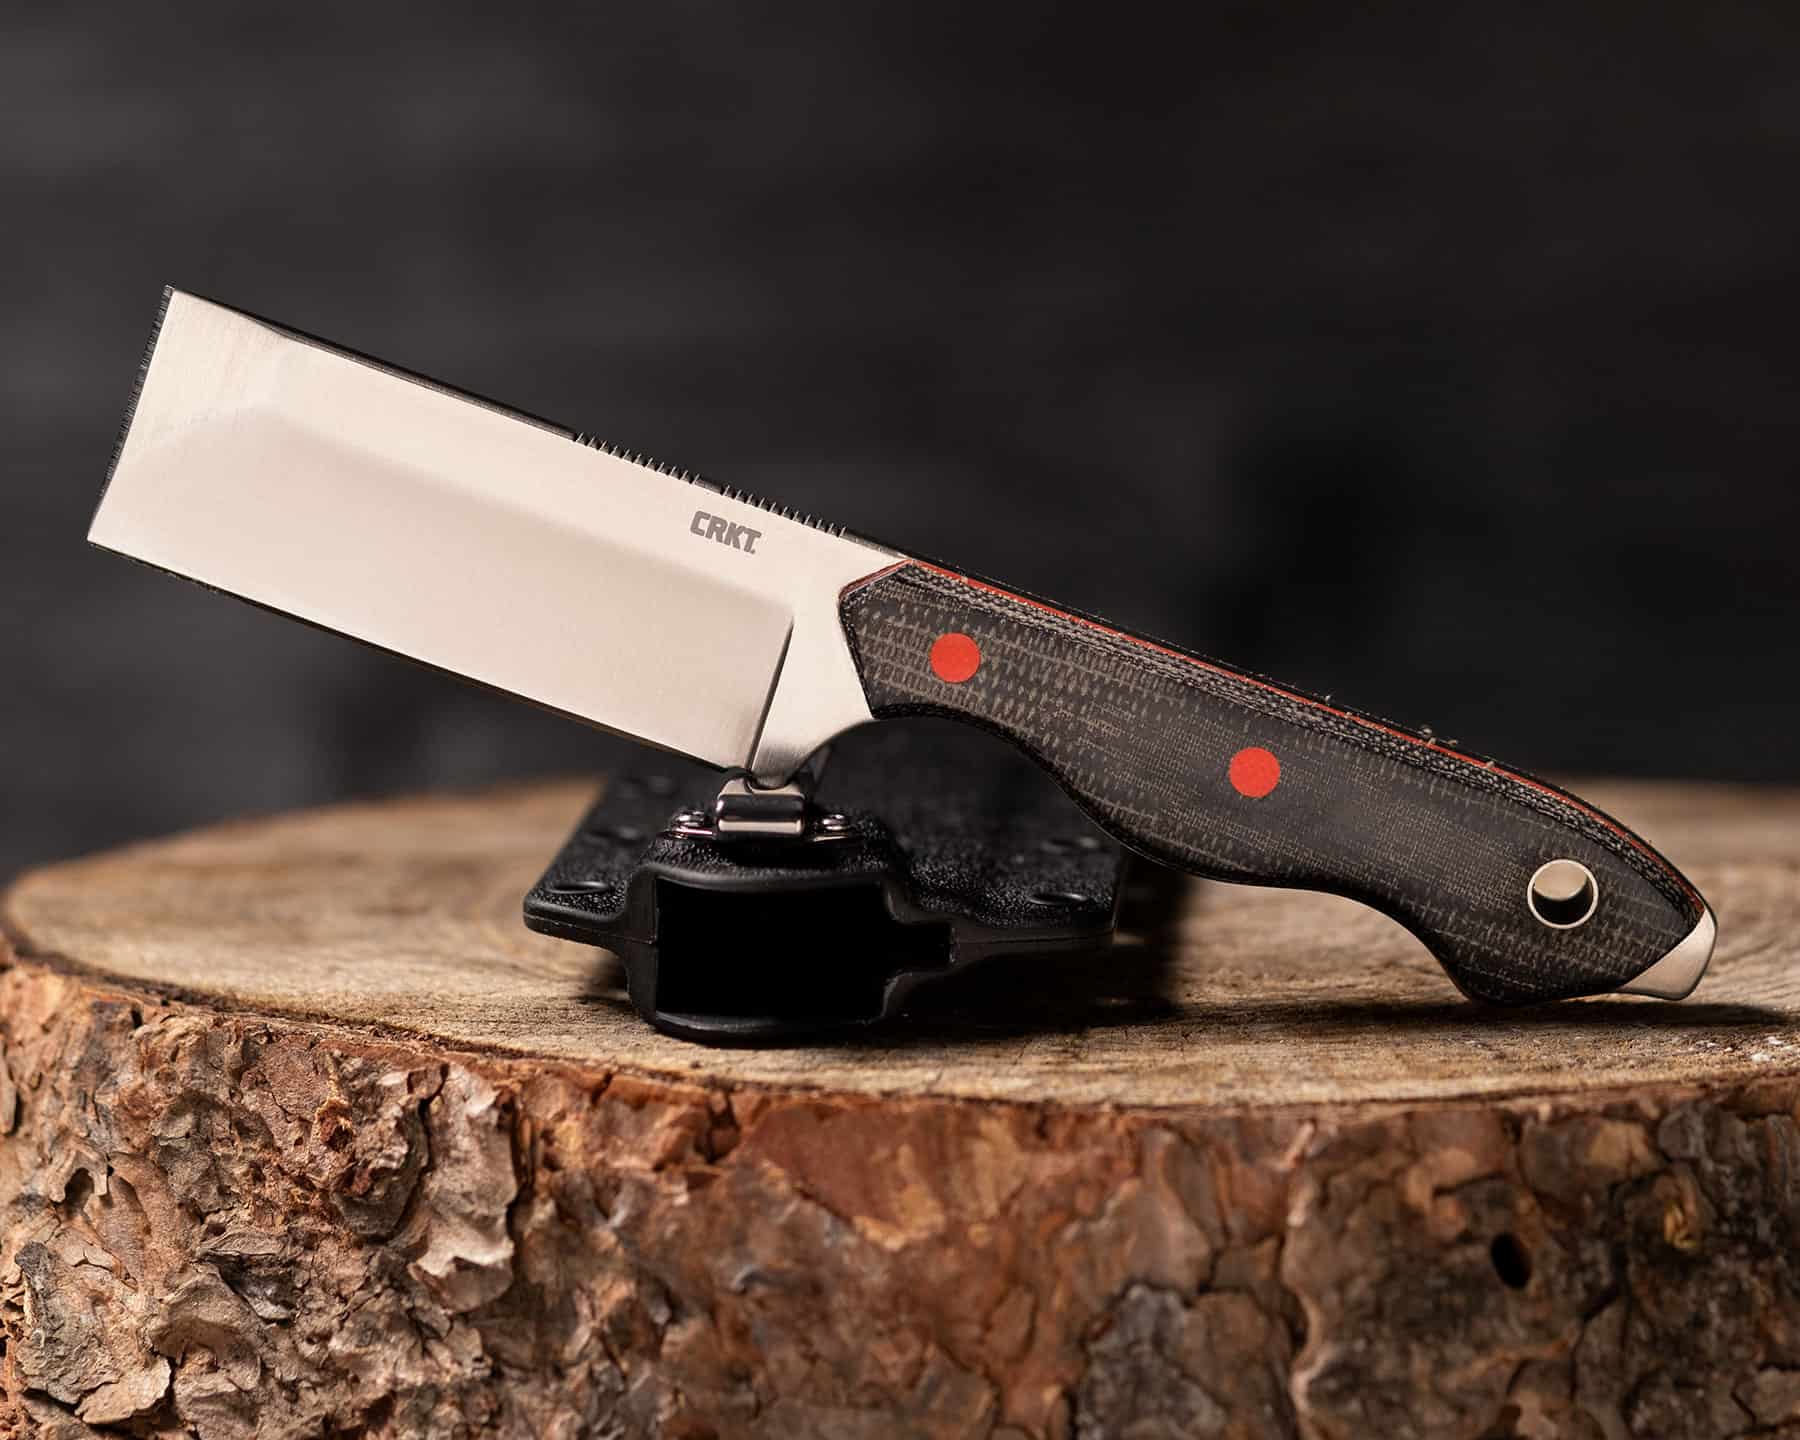 The CRKT Razzle compact ships with a pocket sheath.  